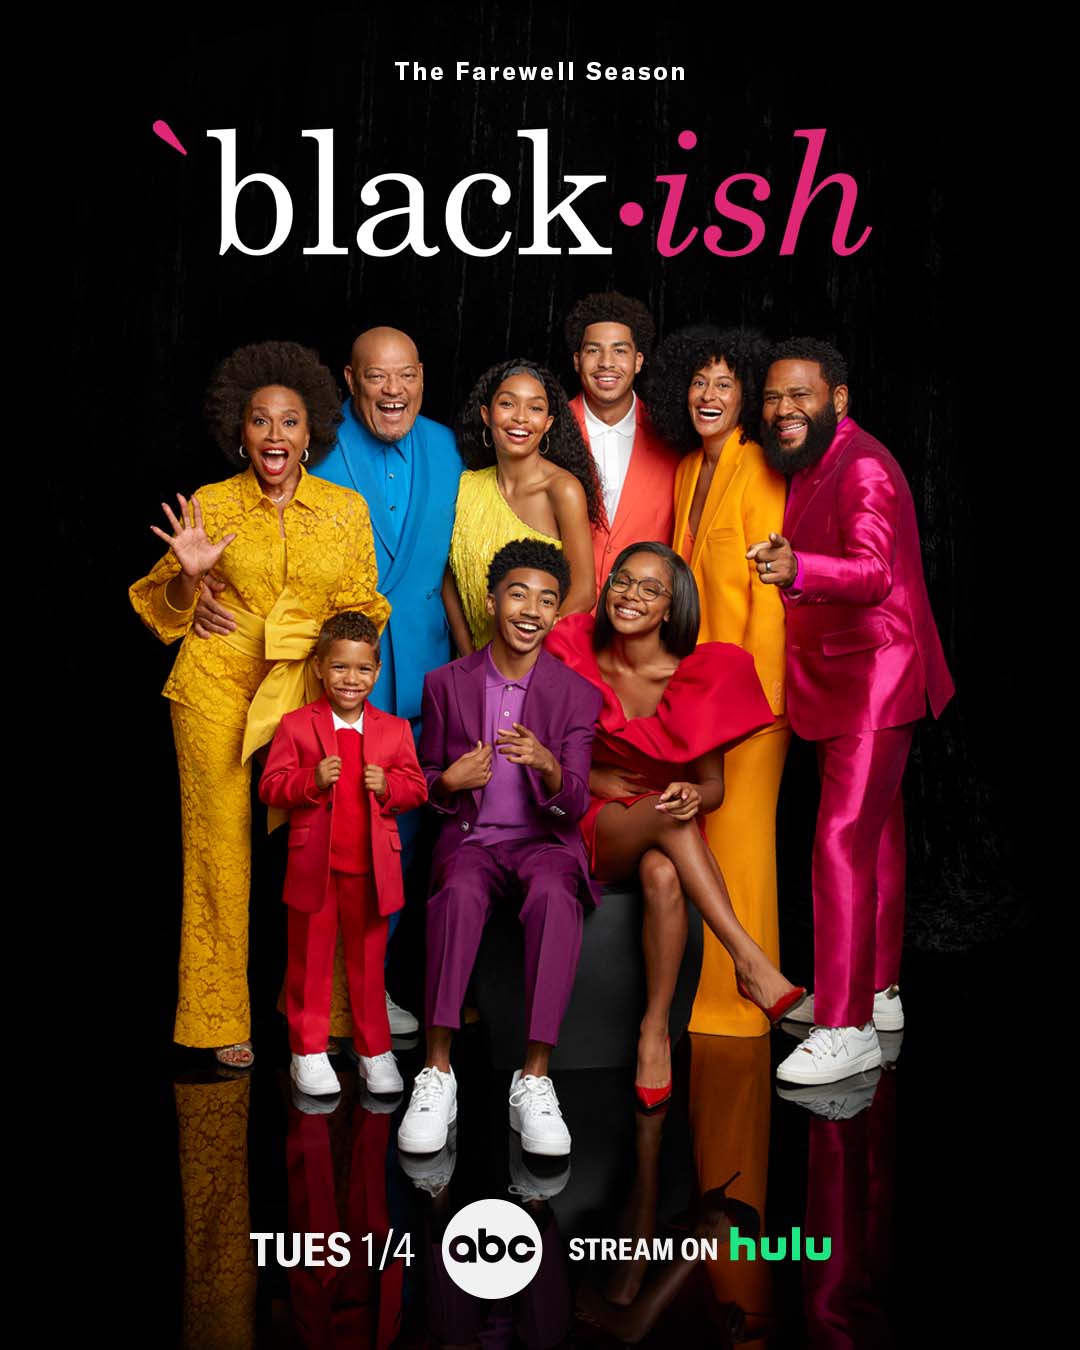 ‘Black-ish’ Welcomes More Special Guest Stars for Celebratory Farewell Season